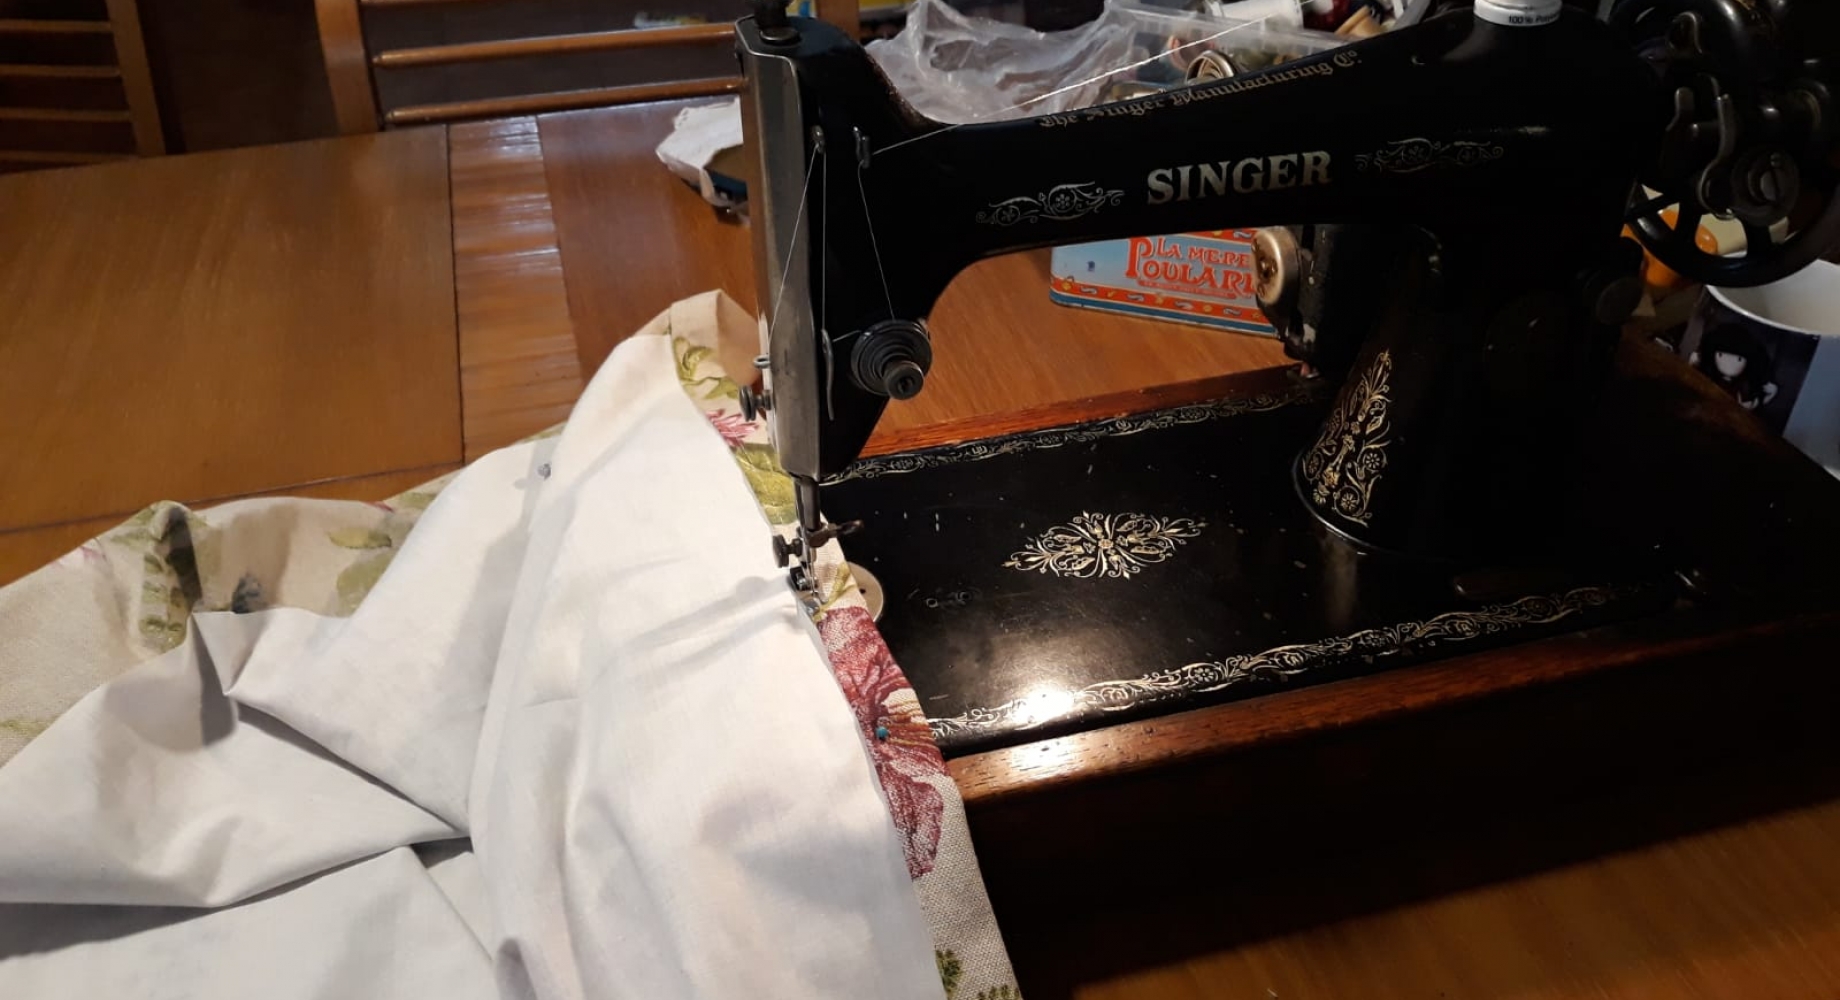 My grandmother's sewing machine, ideal for thick seams